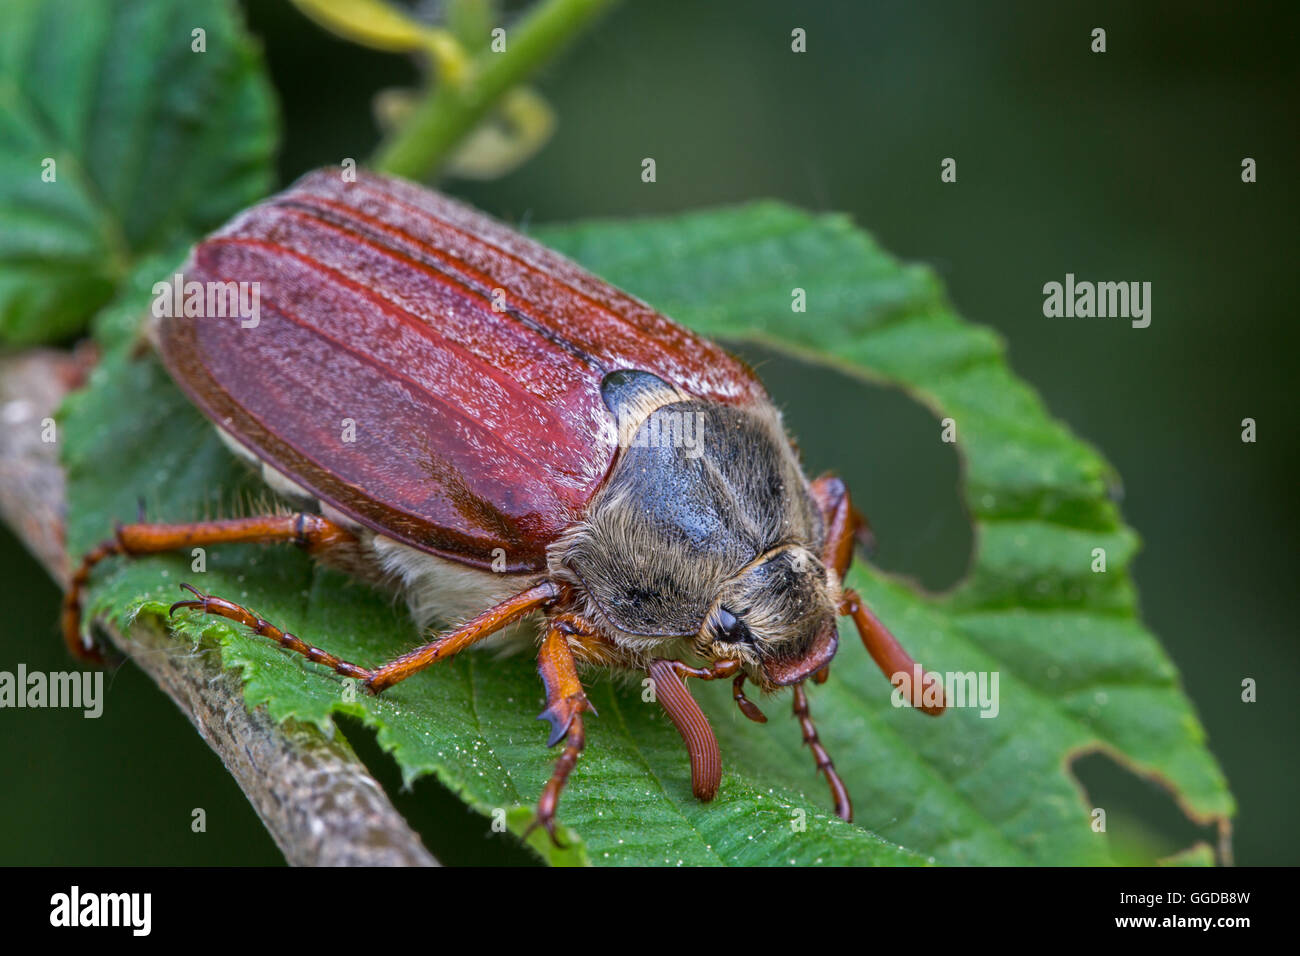 Common cockchafer / May bug (Melolontha melolontha) on leaf Stock Photo